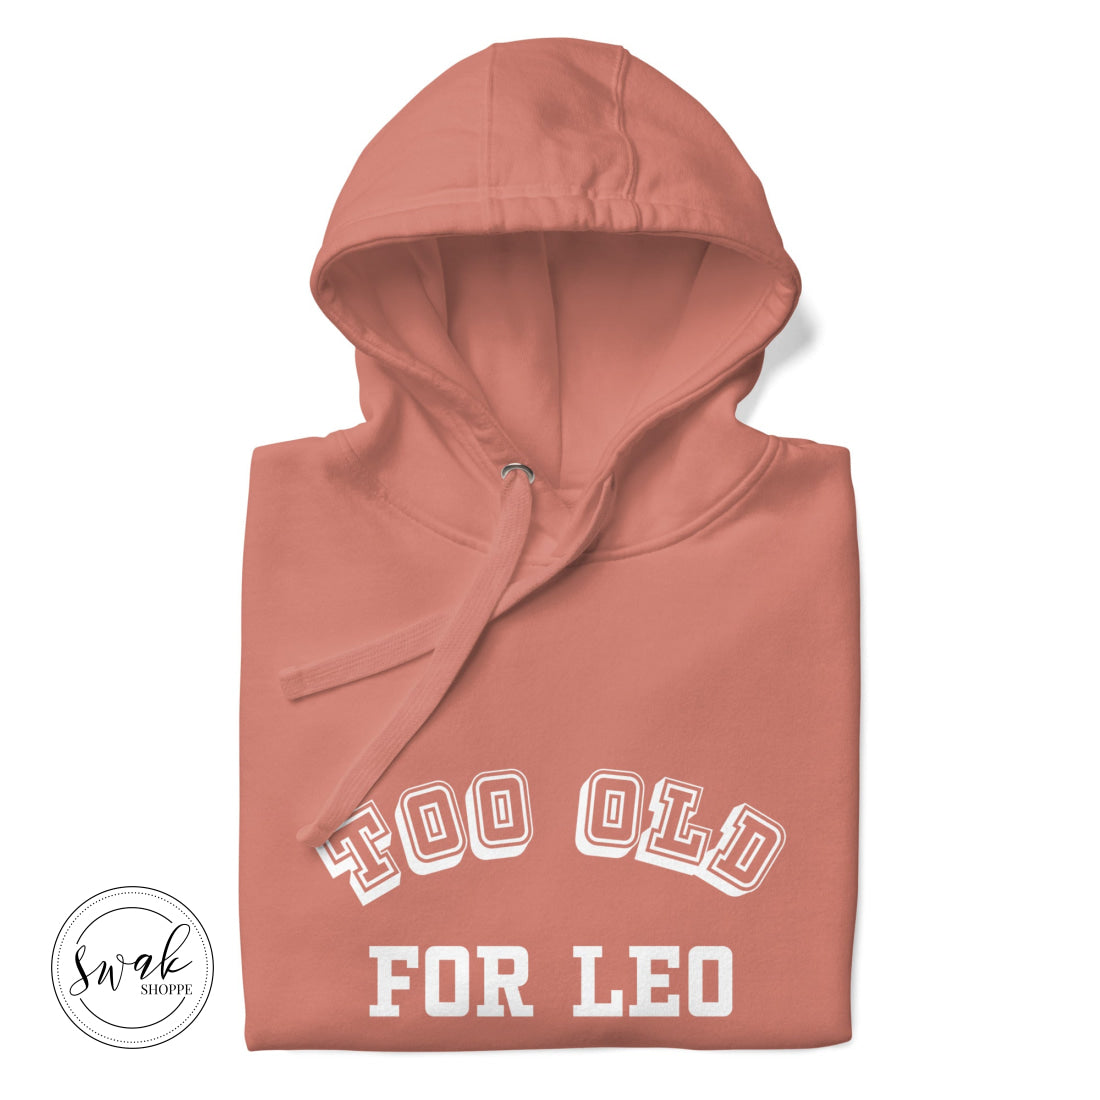 Too Old For Leo Collegiate White Logo Unisex Hoodie Dusty Rose / S